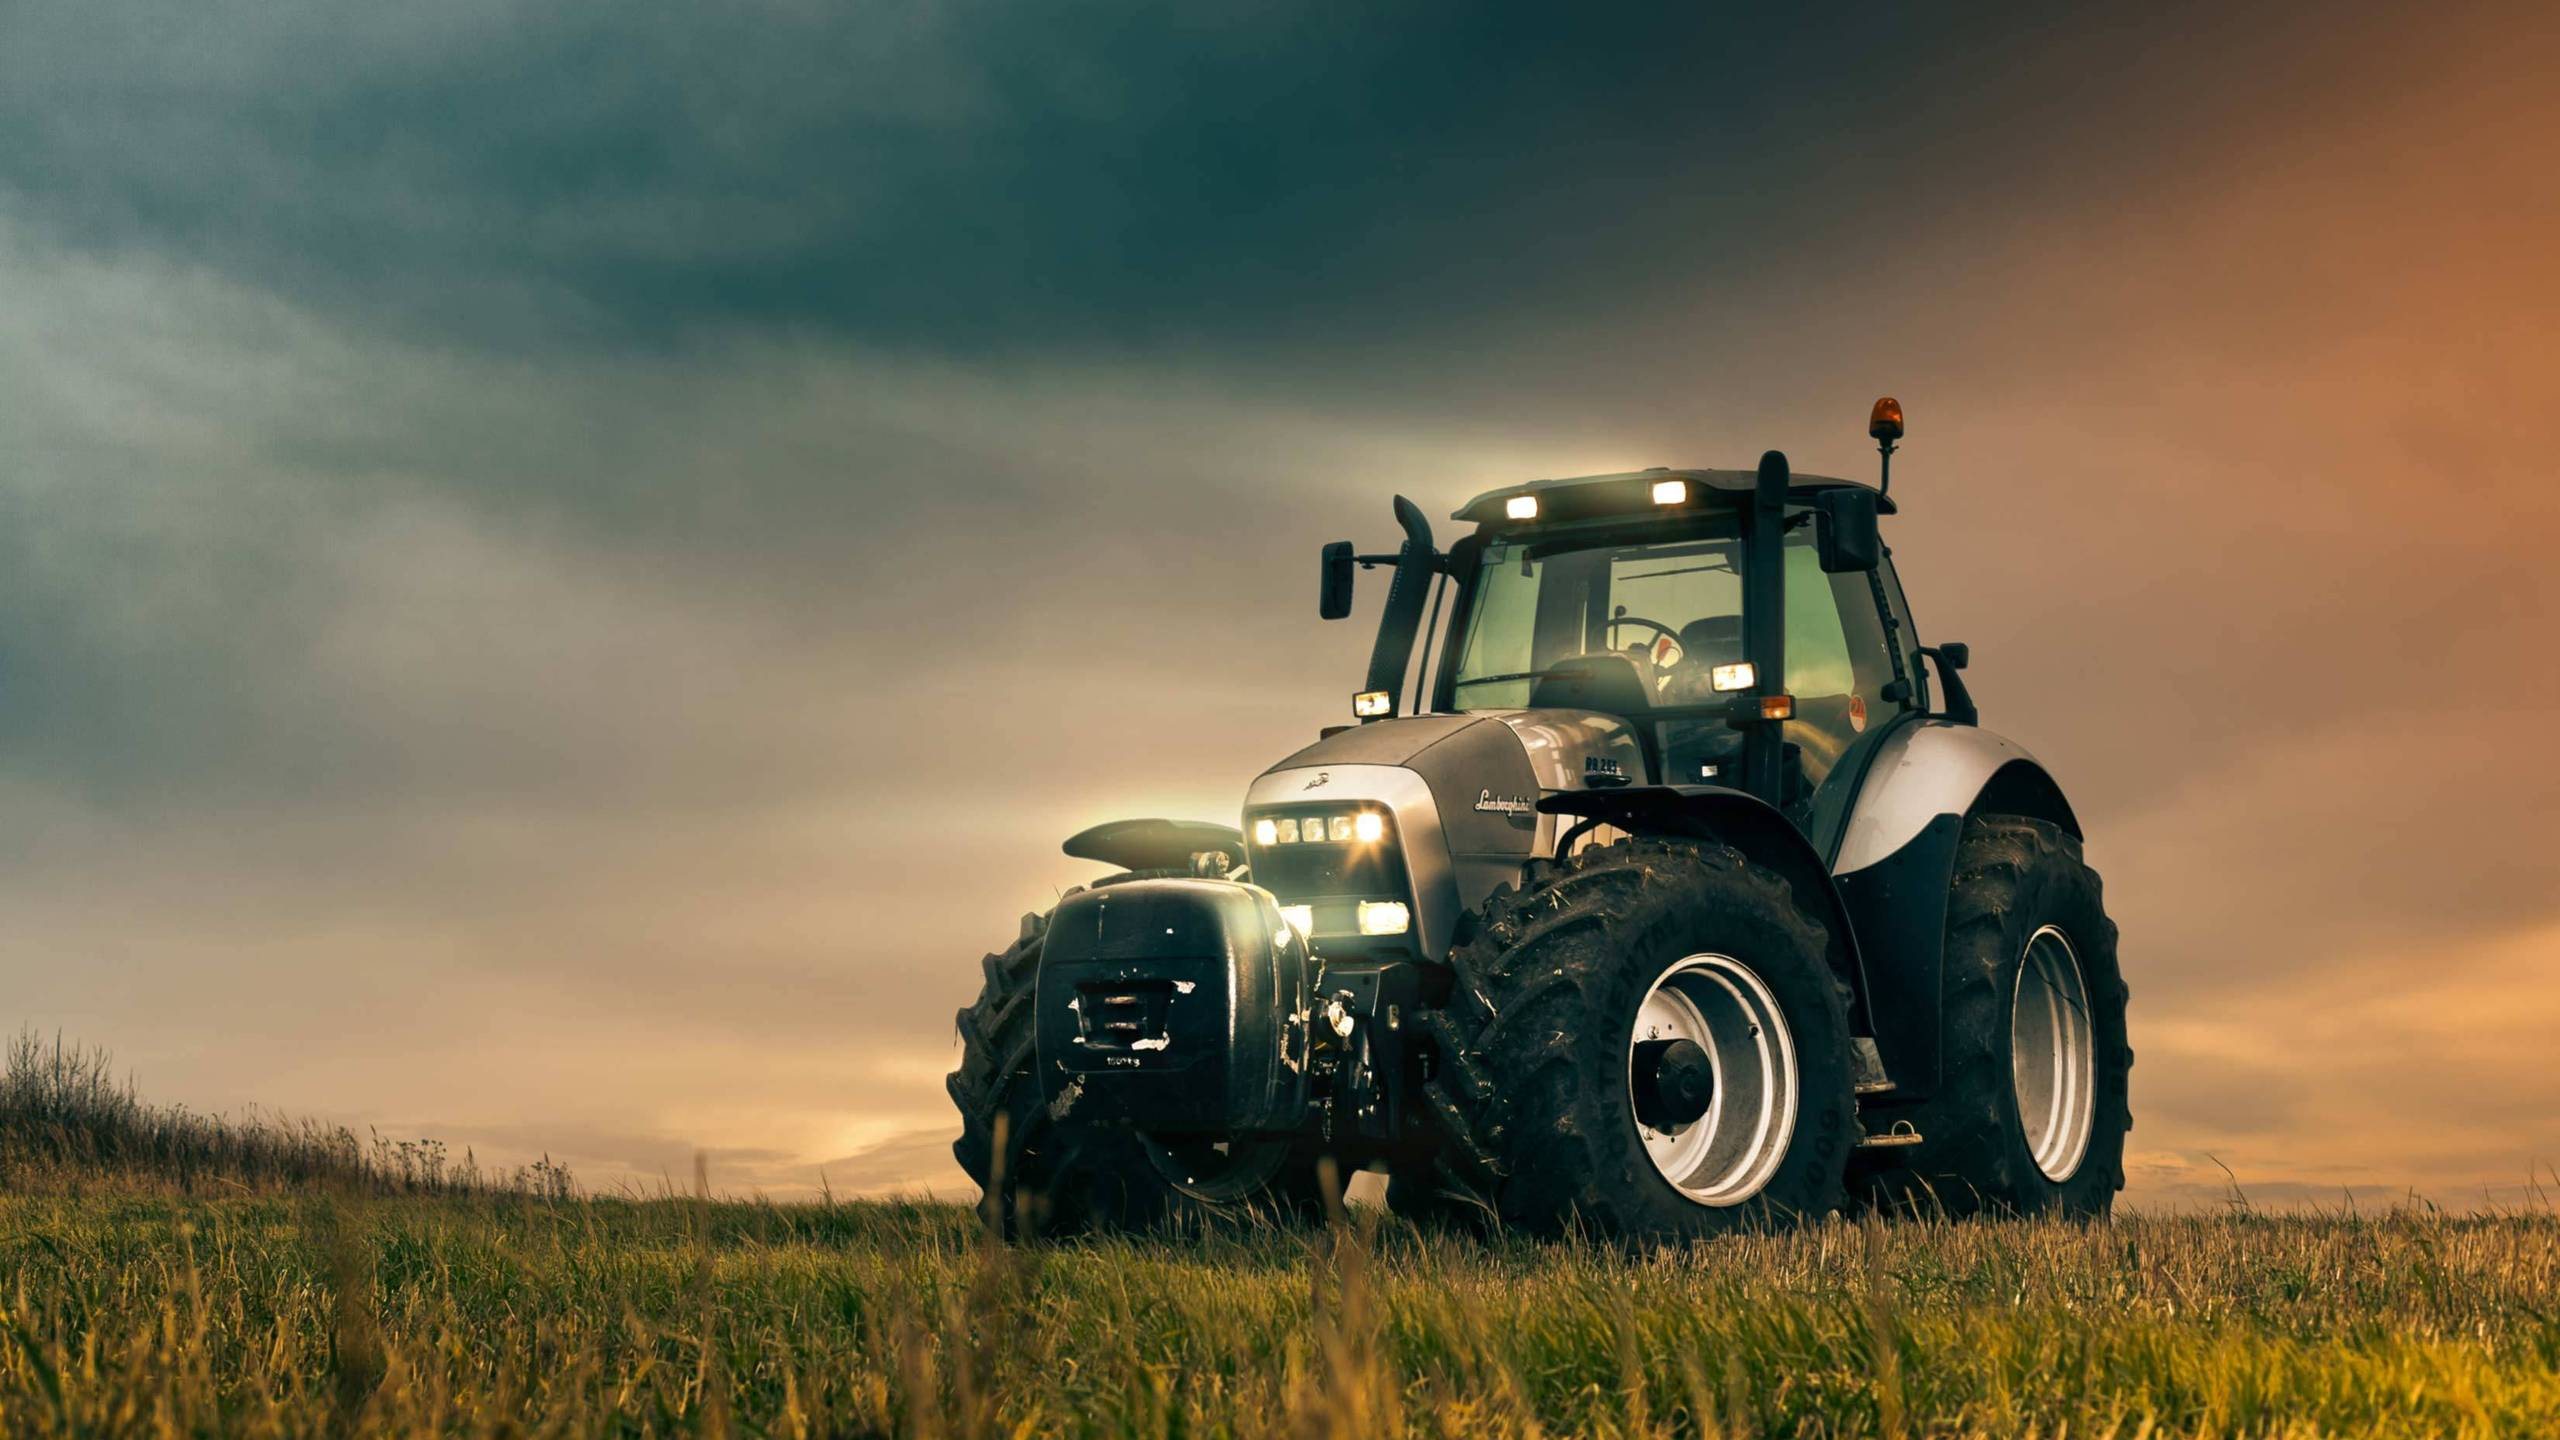 Tractor HD Wallpaper Background Image